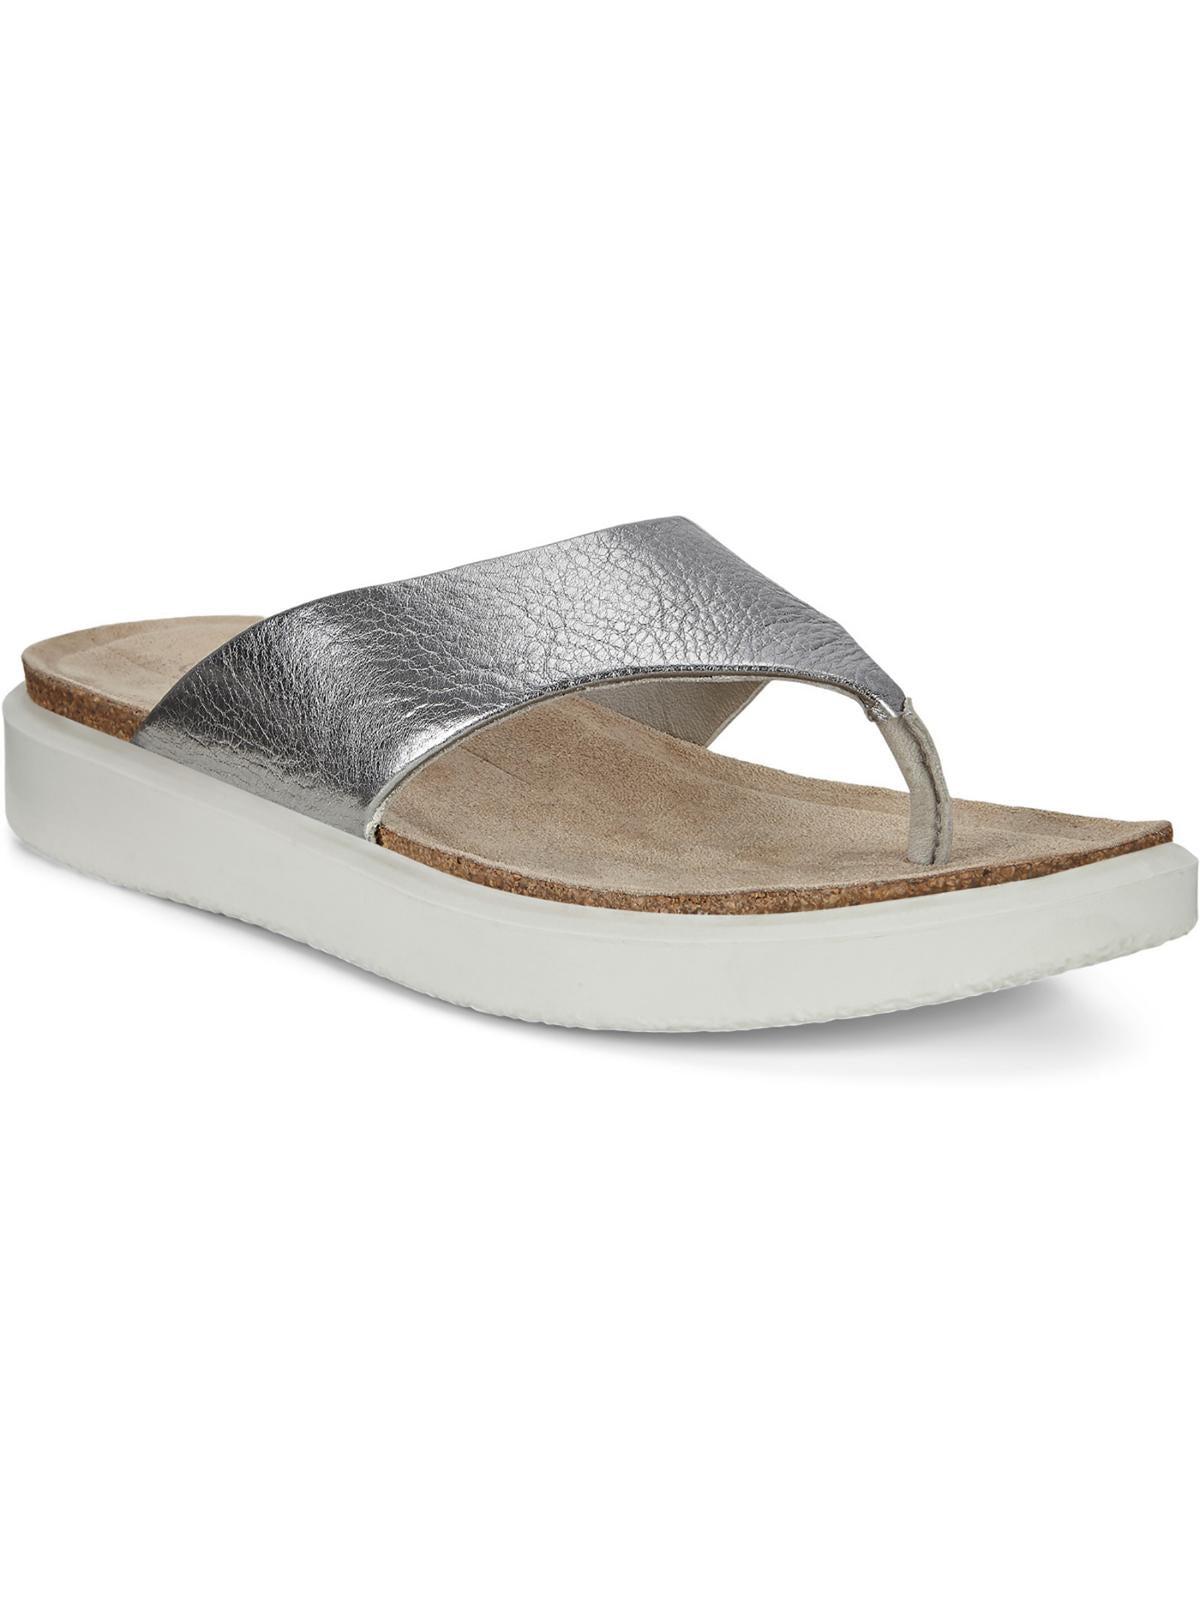 Ecco Corksphere Leather Slip On Thong Sandals in Gray | Lyst